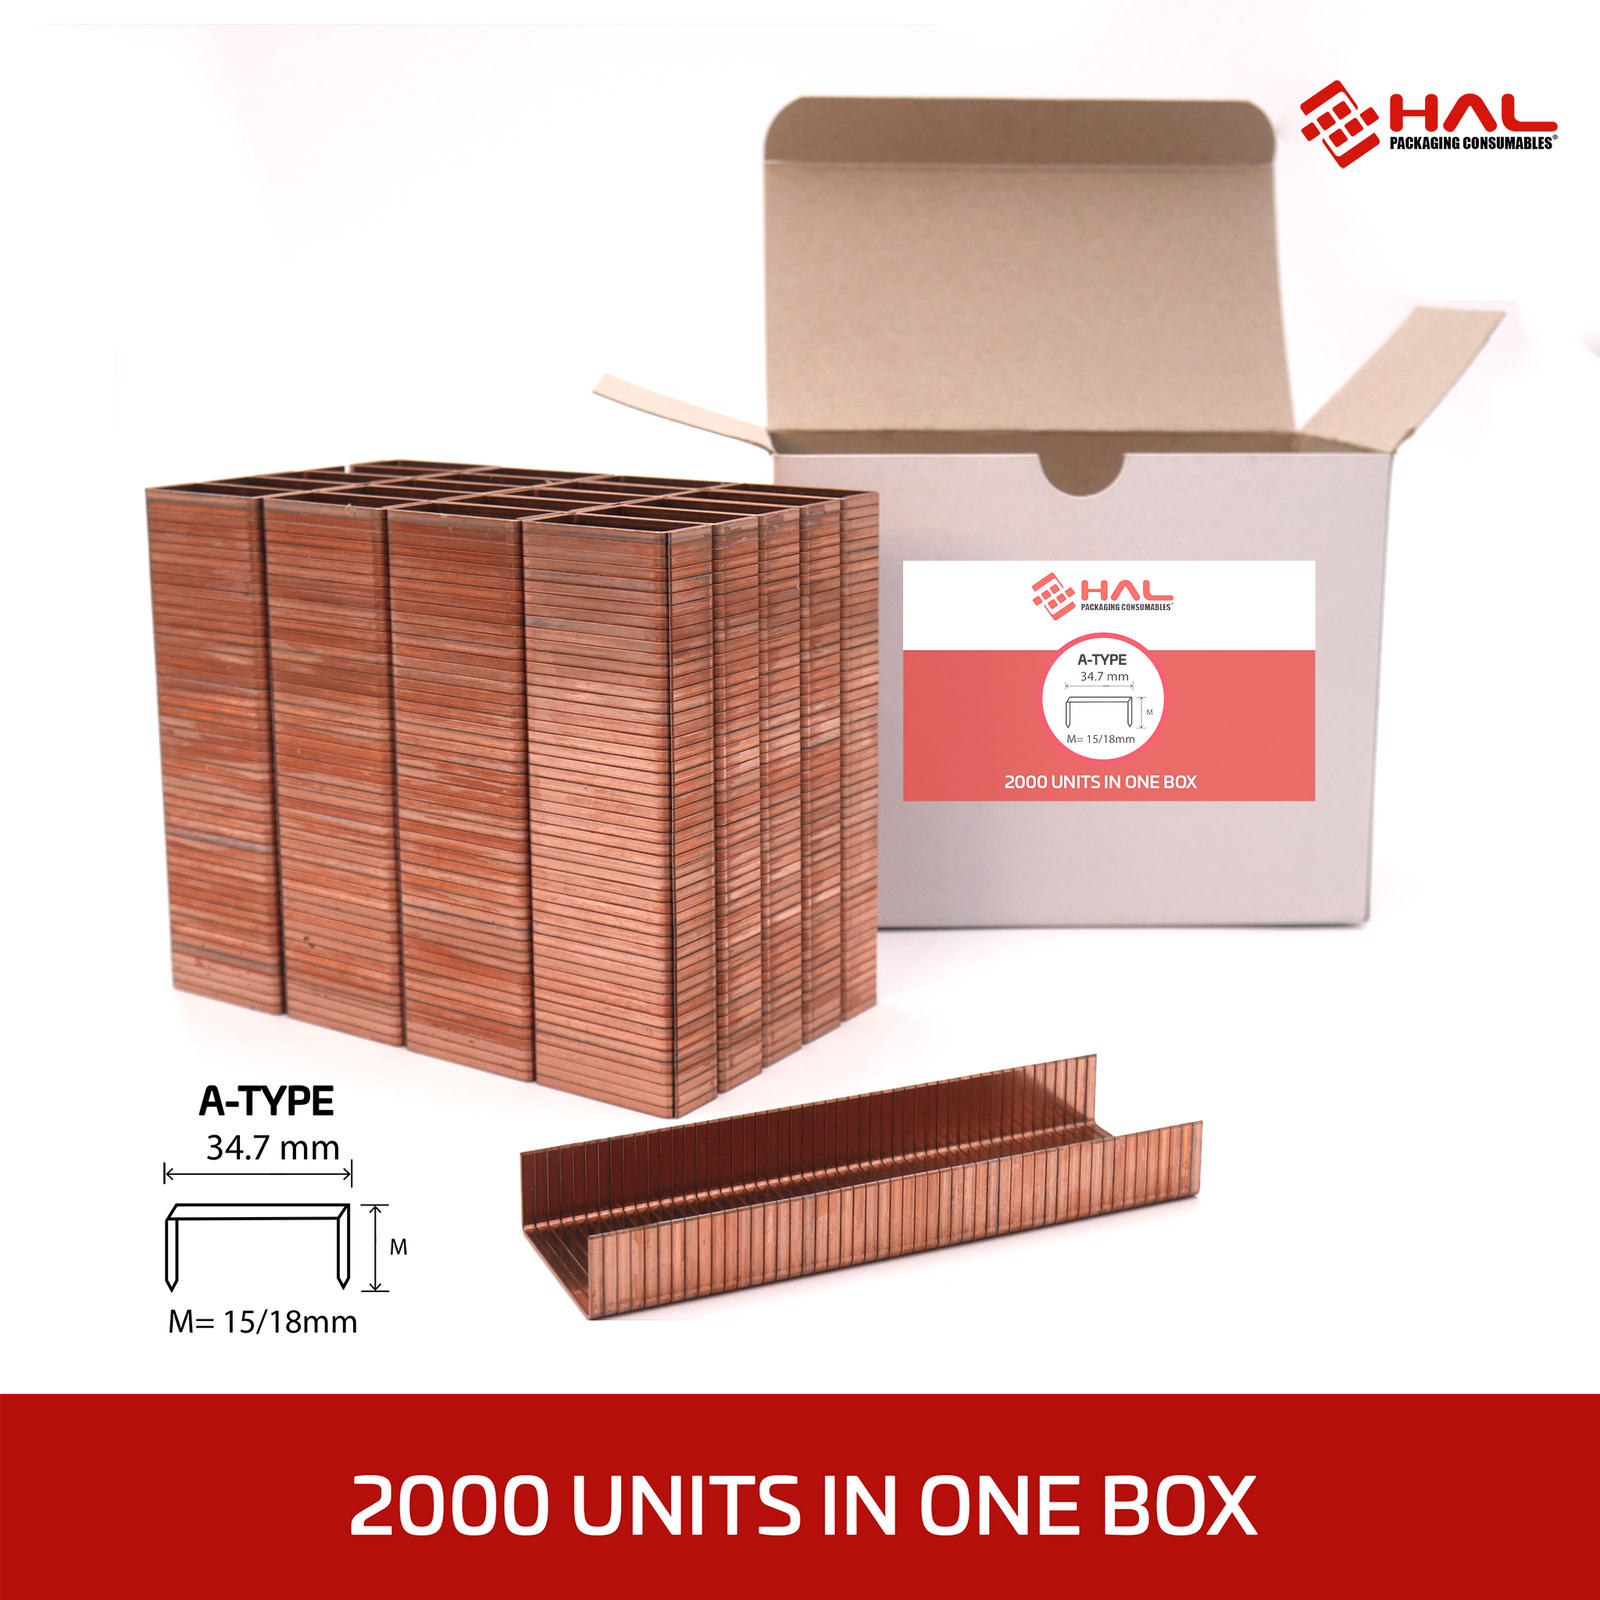 A bulk of 2000 HAL staples included in a a box. Type a Staples measure 34.7 wide